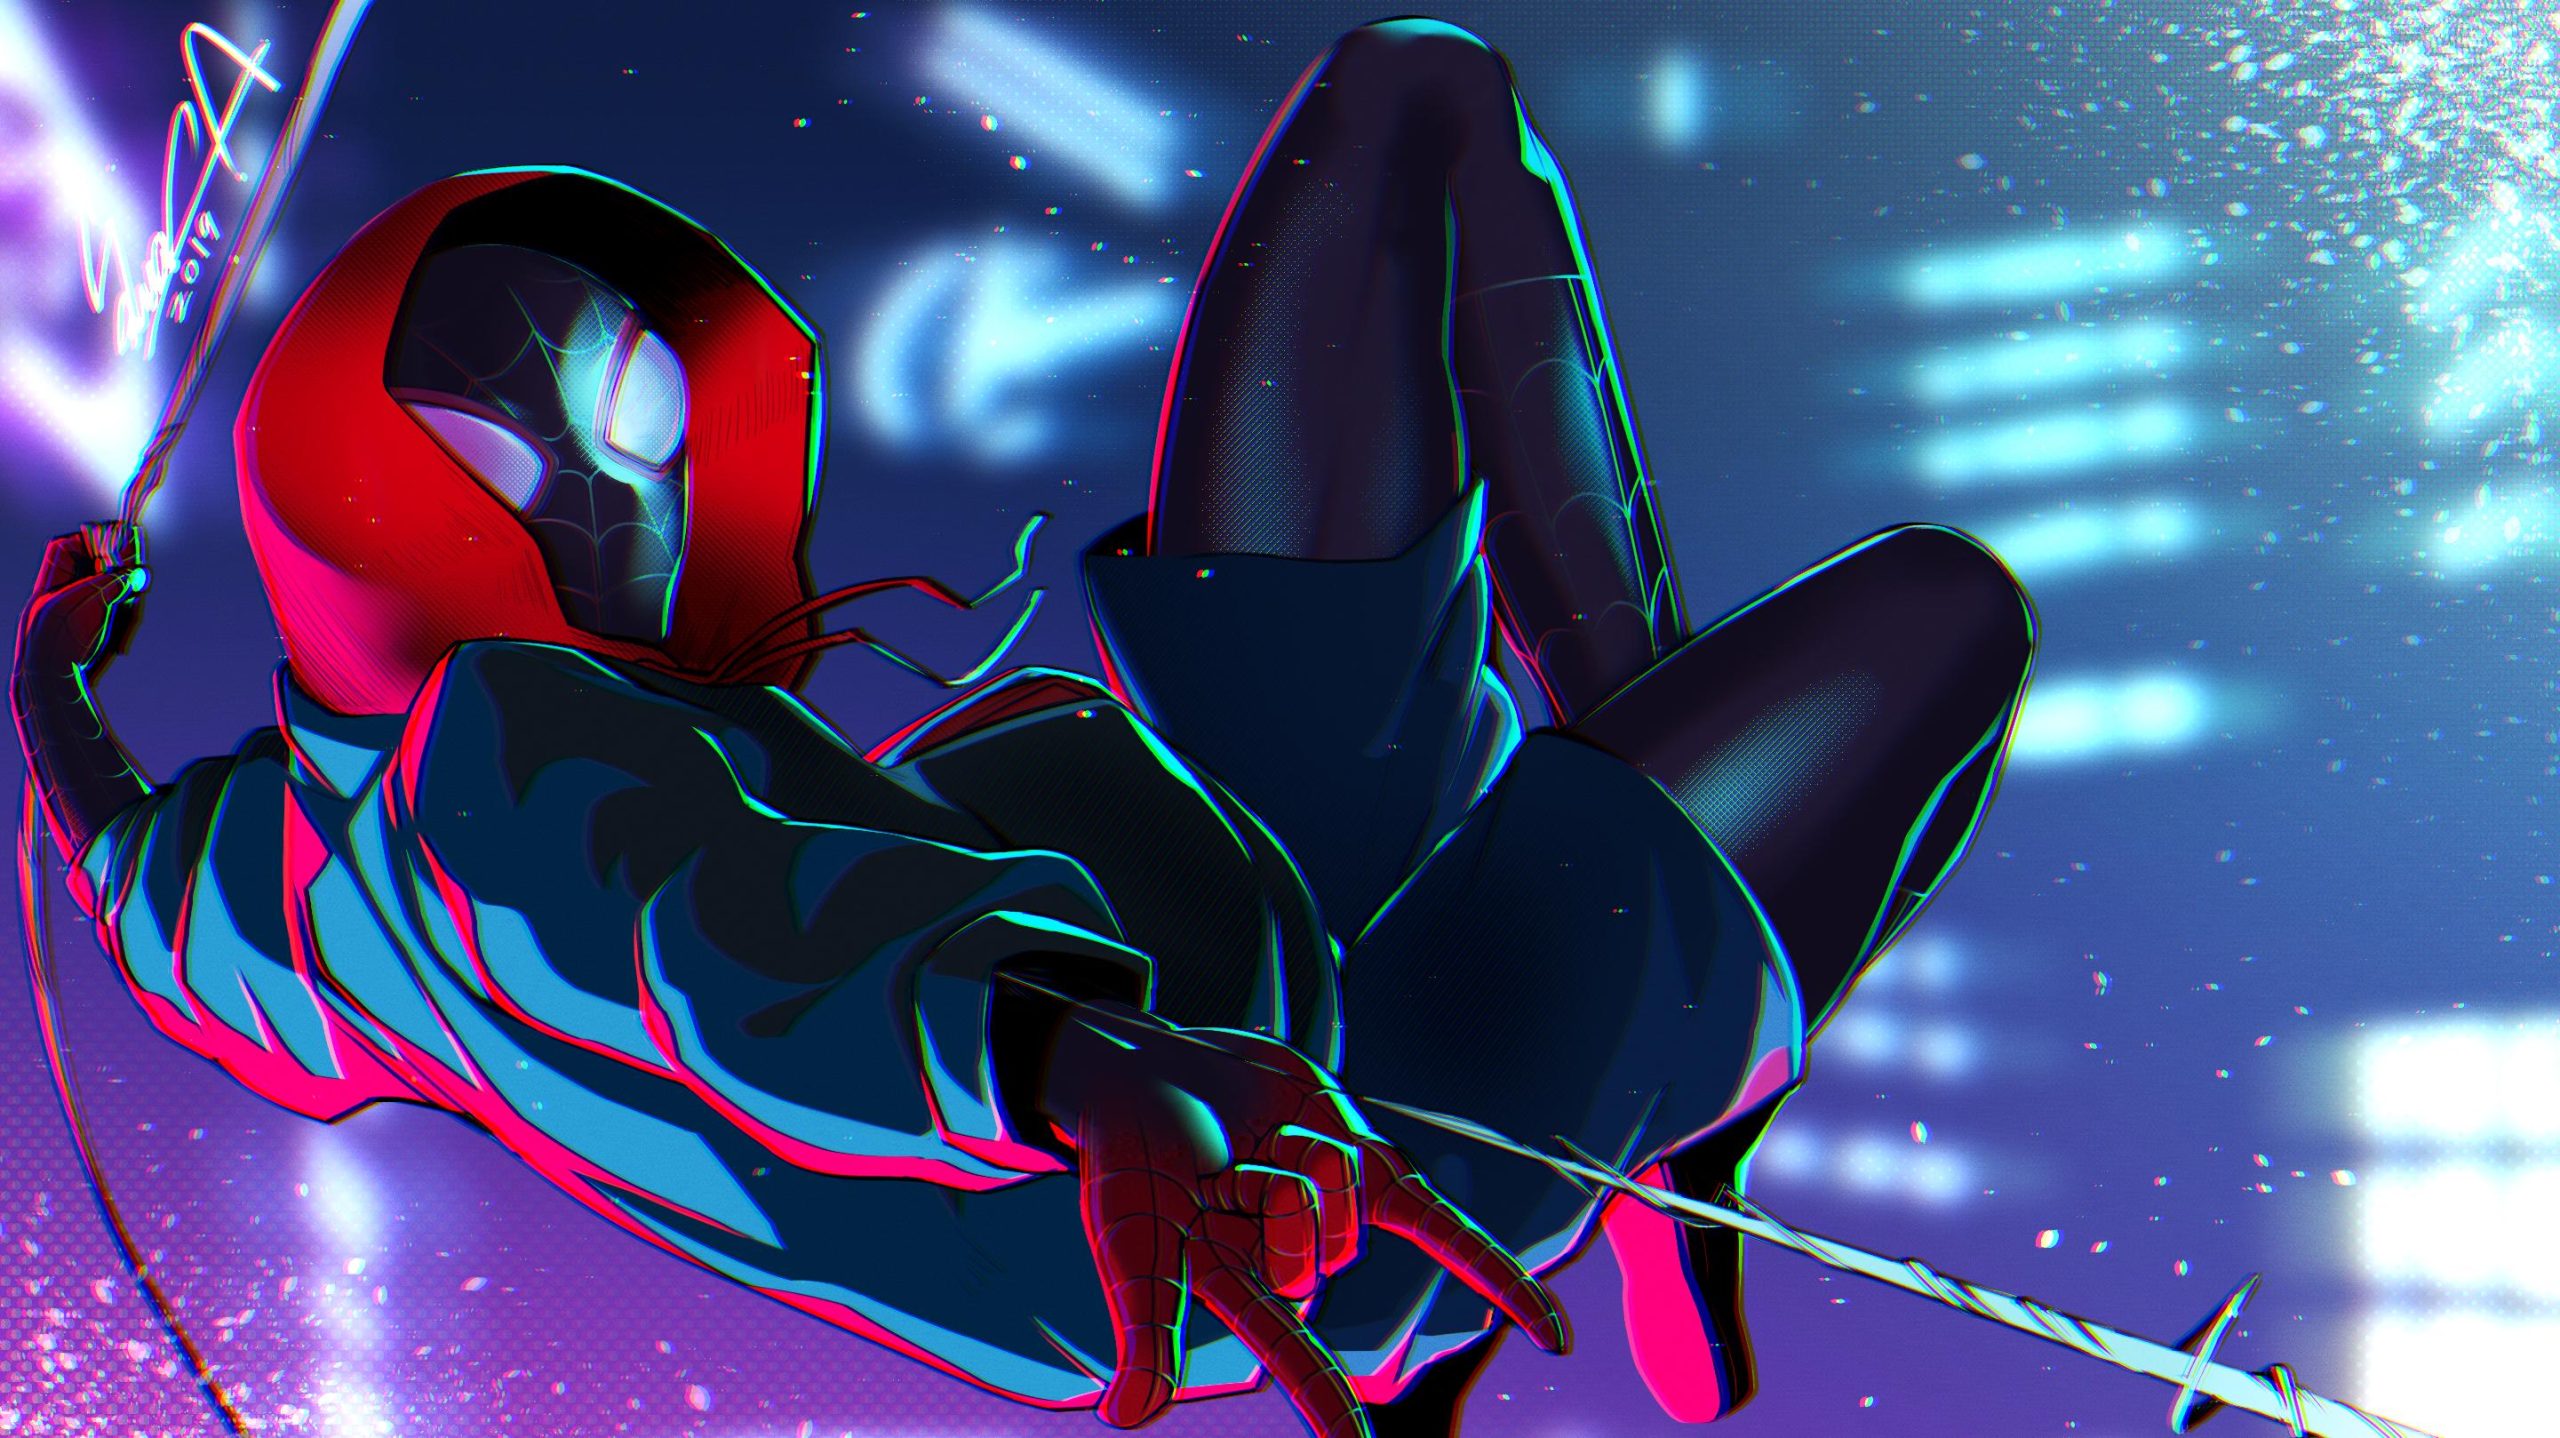 Miles Morales Cartoon Hd Wallpapers For Pc